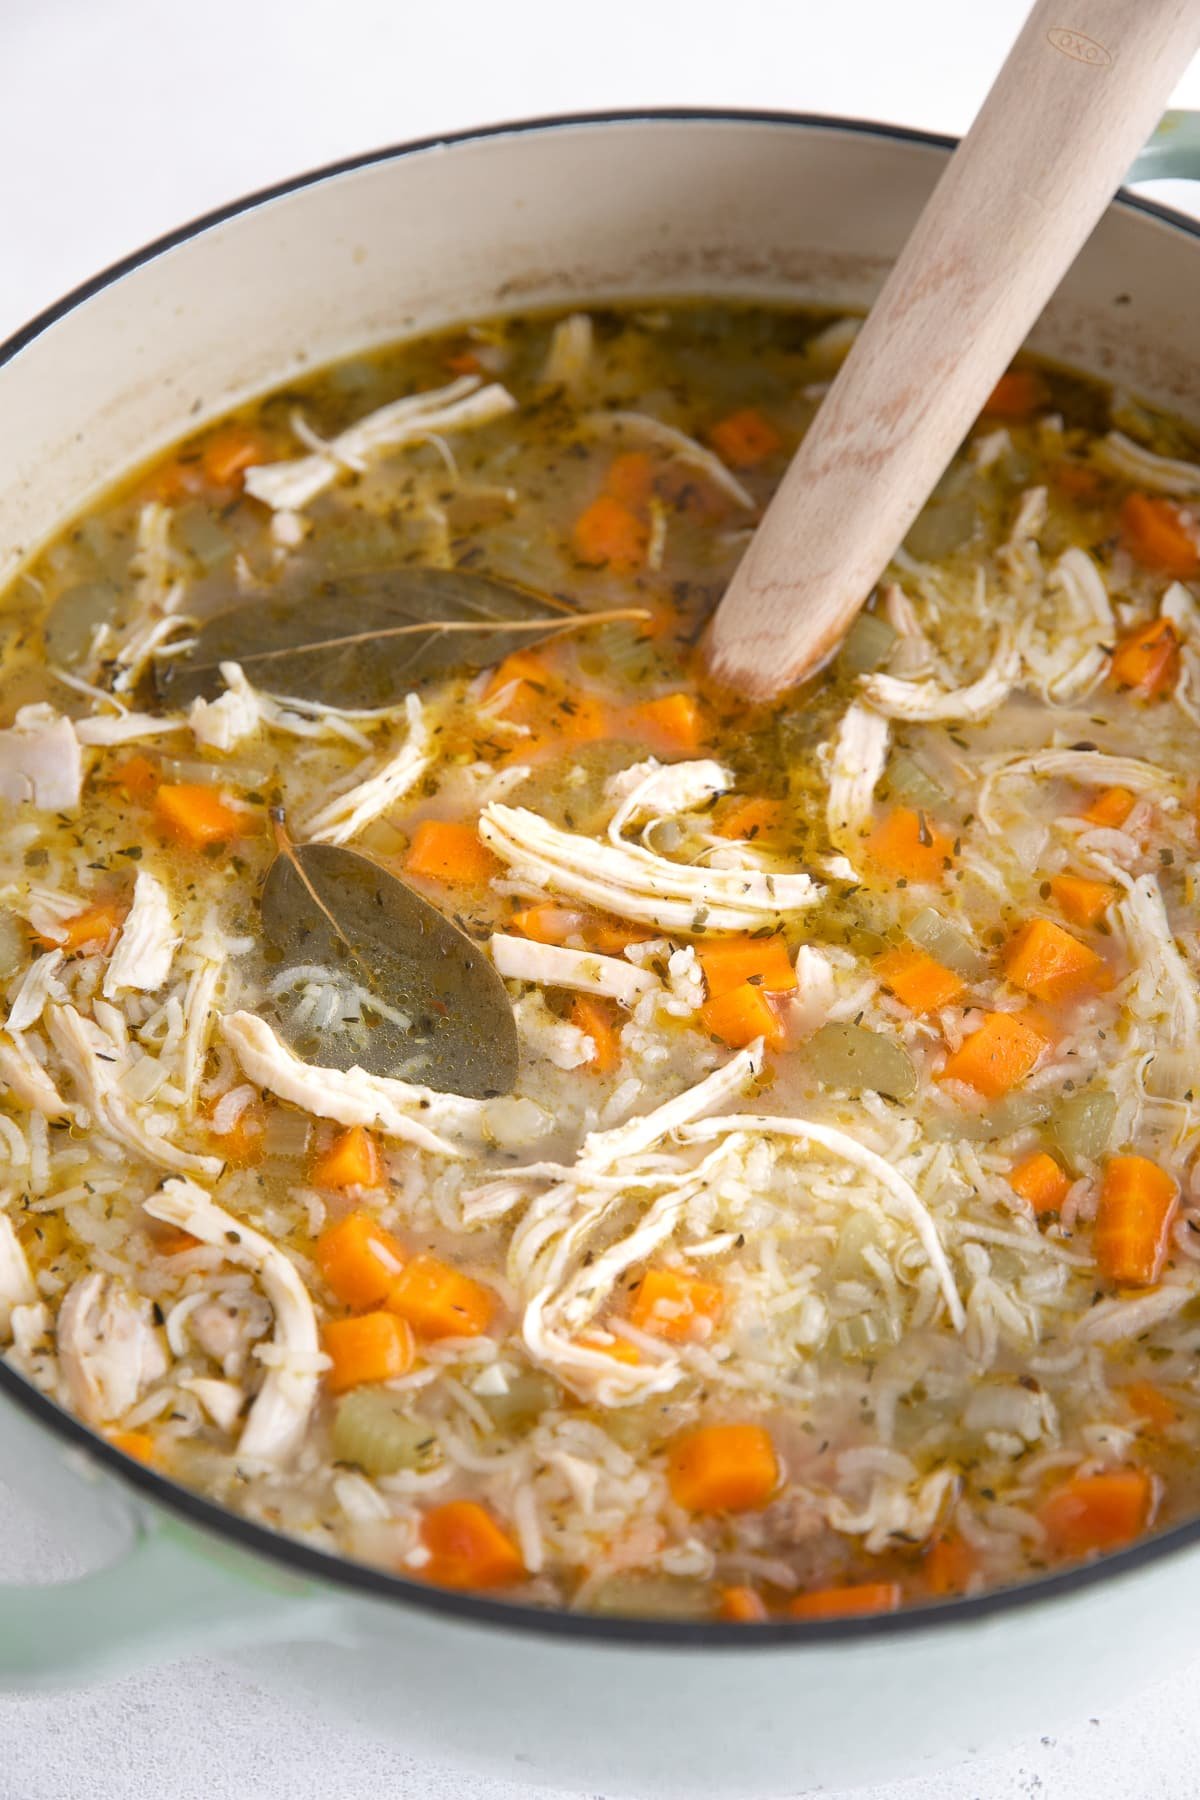 Large pot filled with chicken and rice soup loaded with carrots and celery.